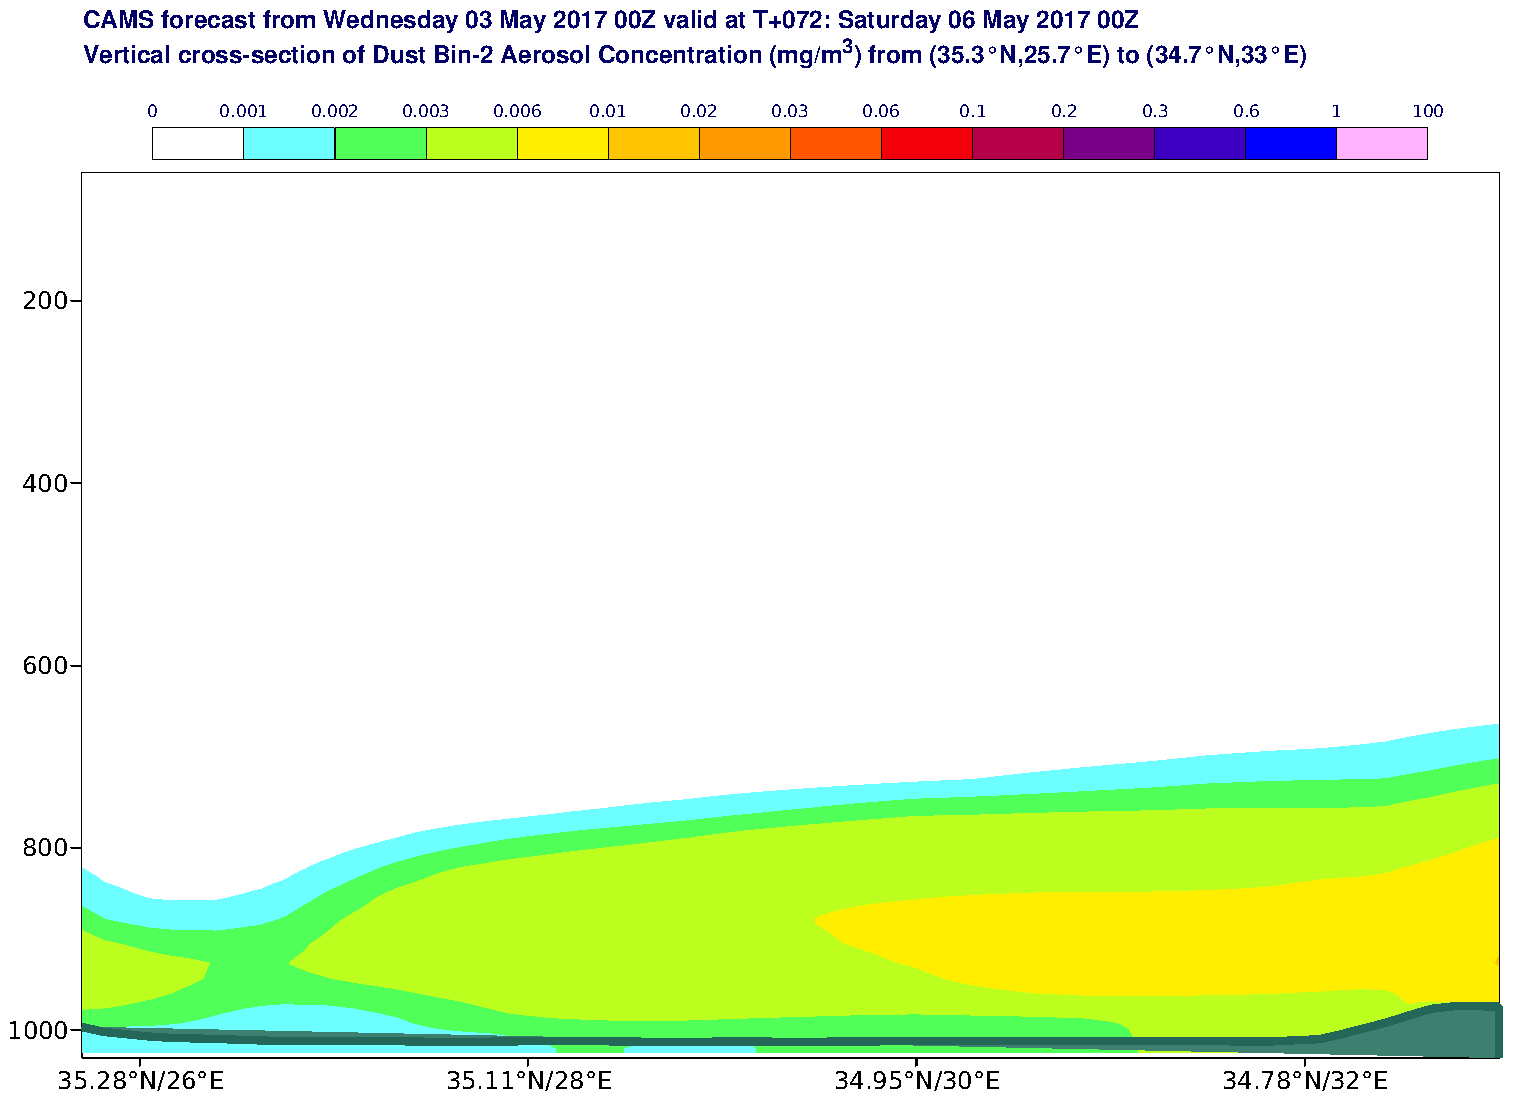 Vertical cross-section of Dust Bin-2 Aerosol Concentration (mg/m3) valid at T72 - 2017-05-06 00:00